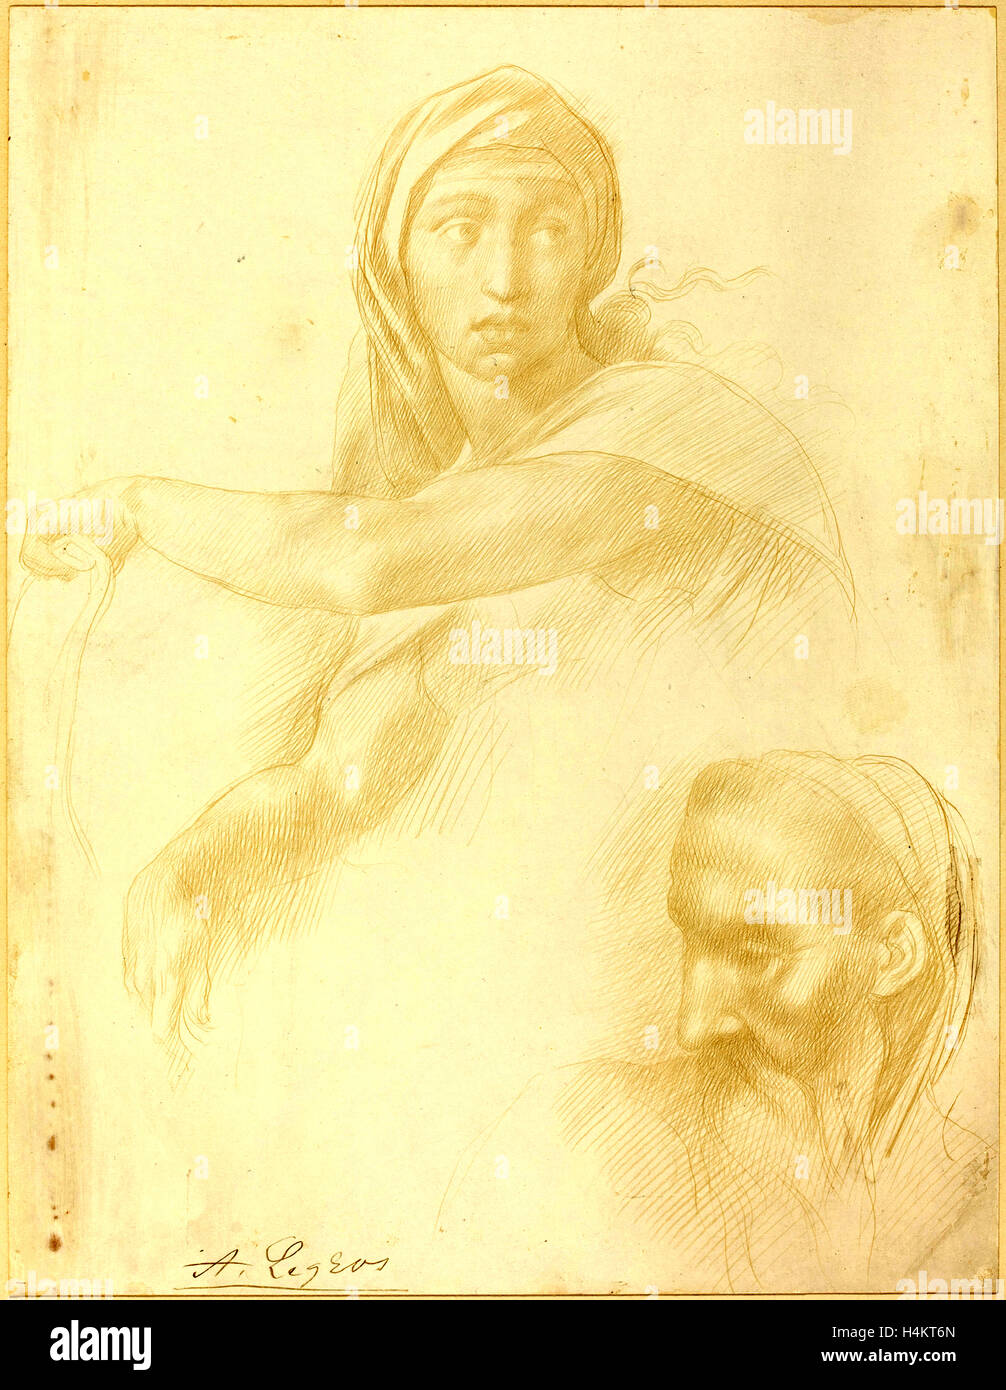 Alphonse Legros after Michelangelo, Study of Delphic Sibyl; Head of a Man, French, 1837-1911, metalpoint on prepared paper Stock Photo